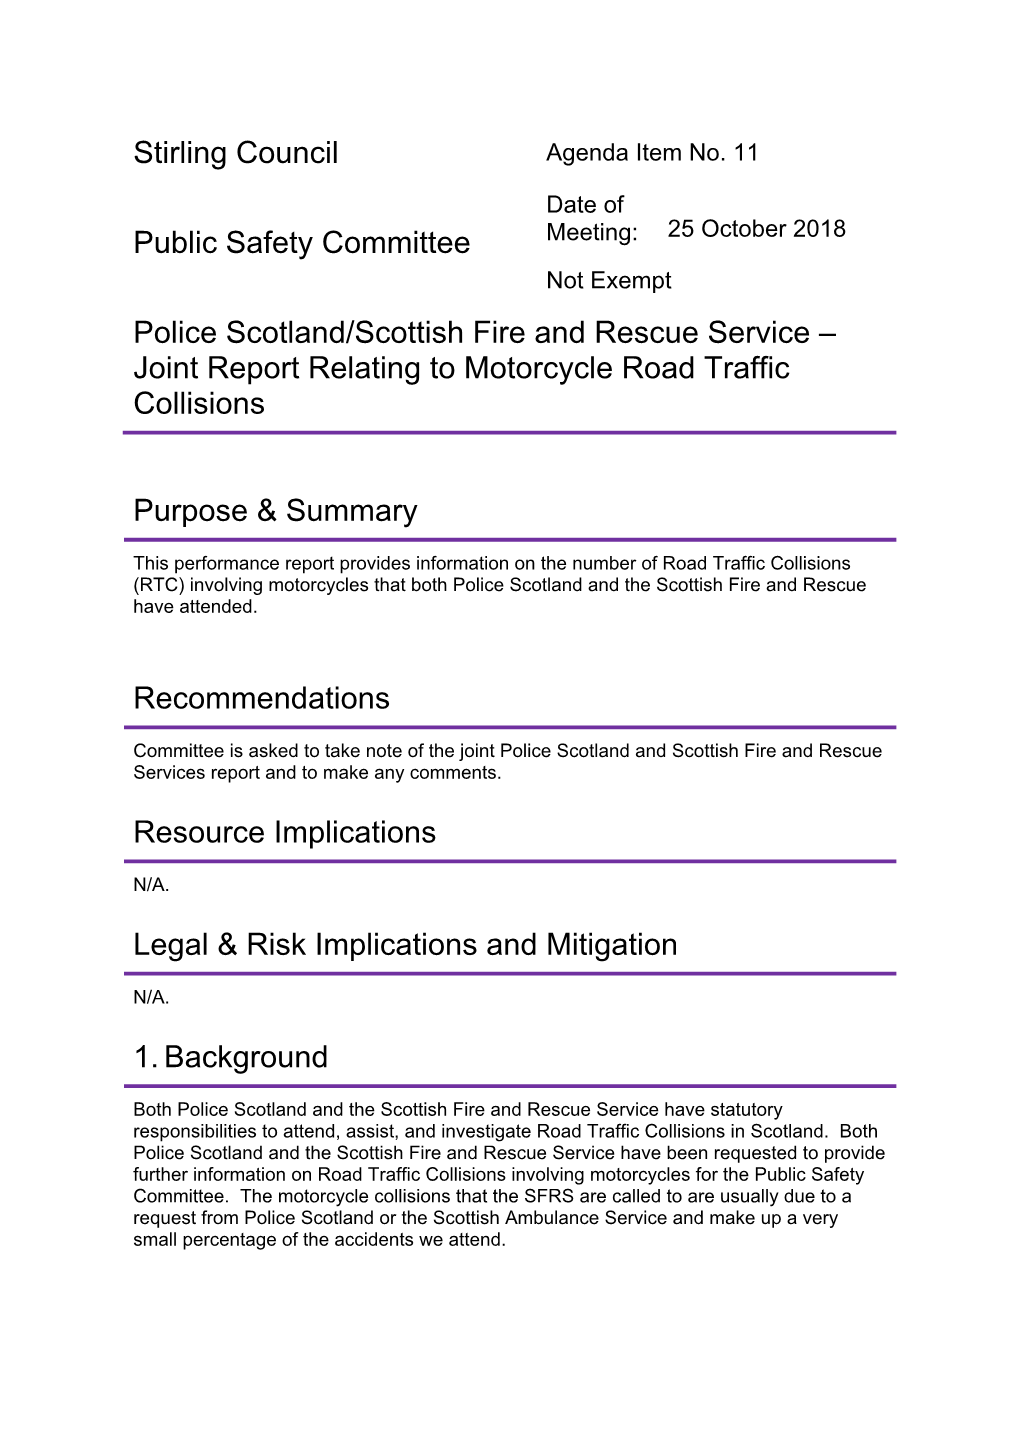 Police Scotland/Scottish Fire and Rescue Service – Joint Report Relating to Motorcycle Road Traffic Collisions